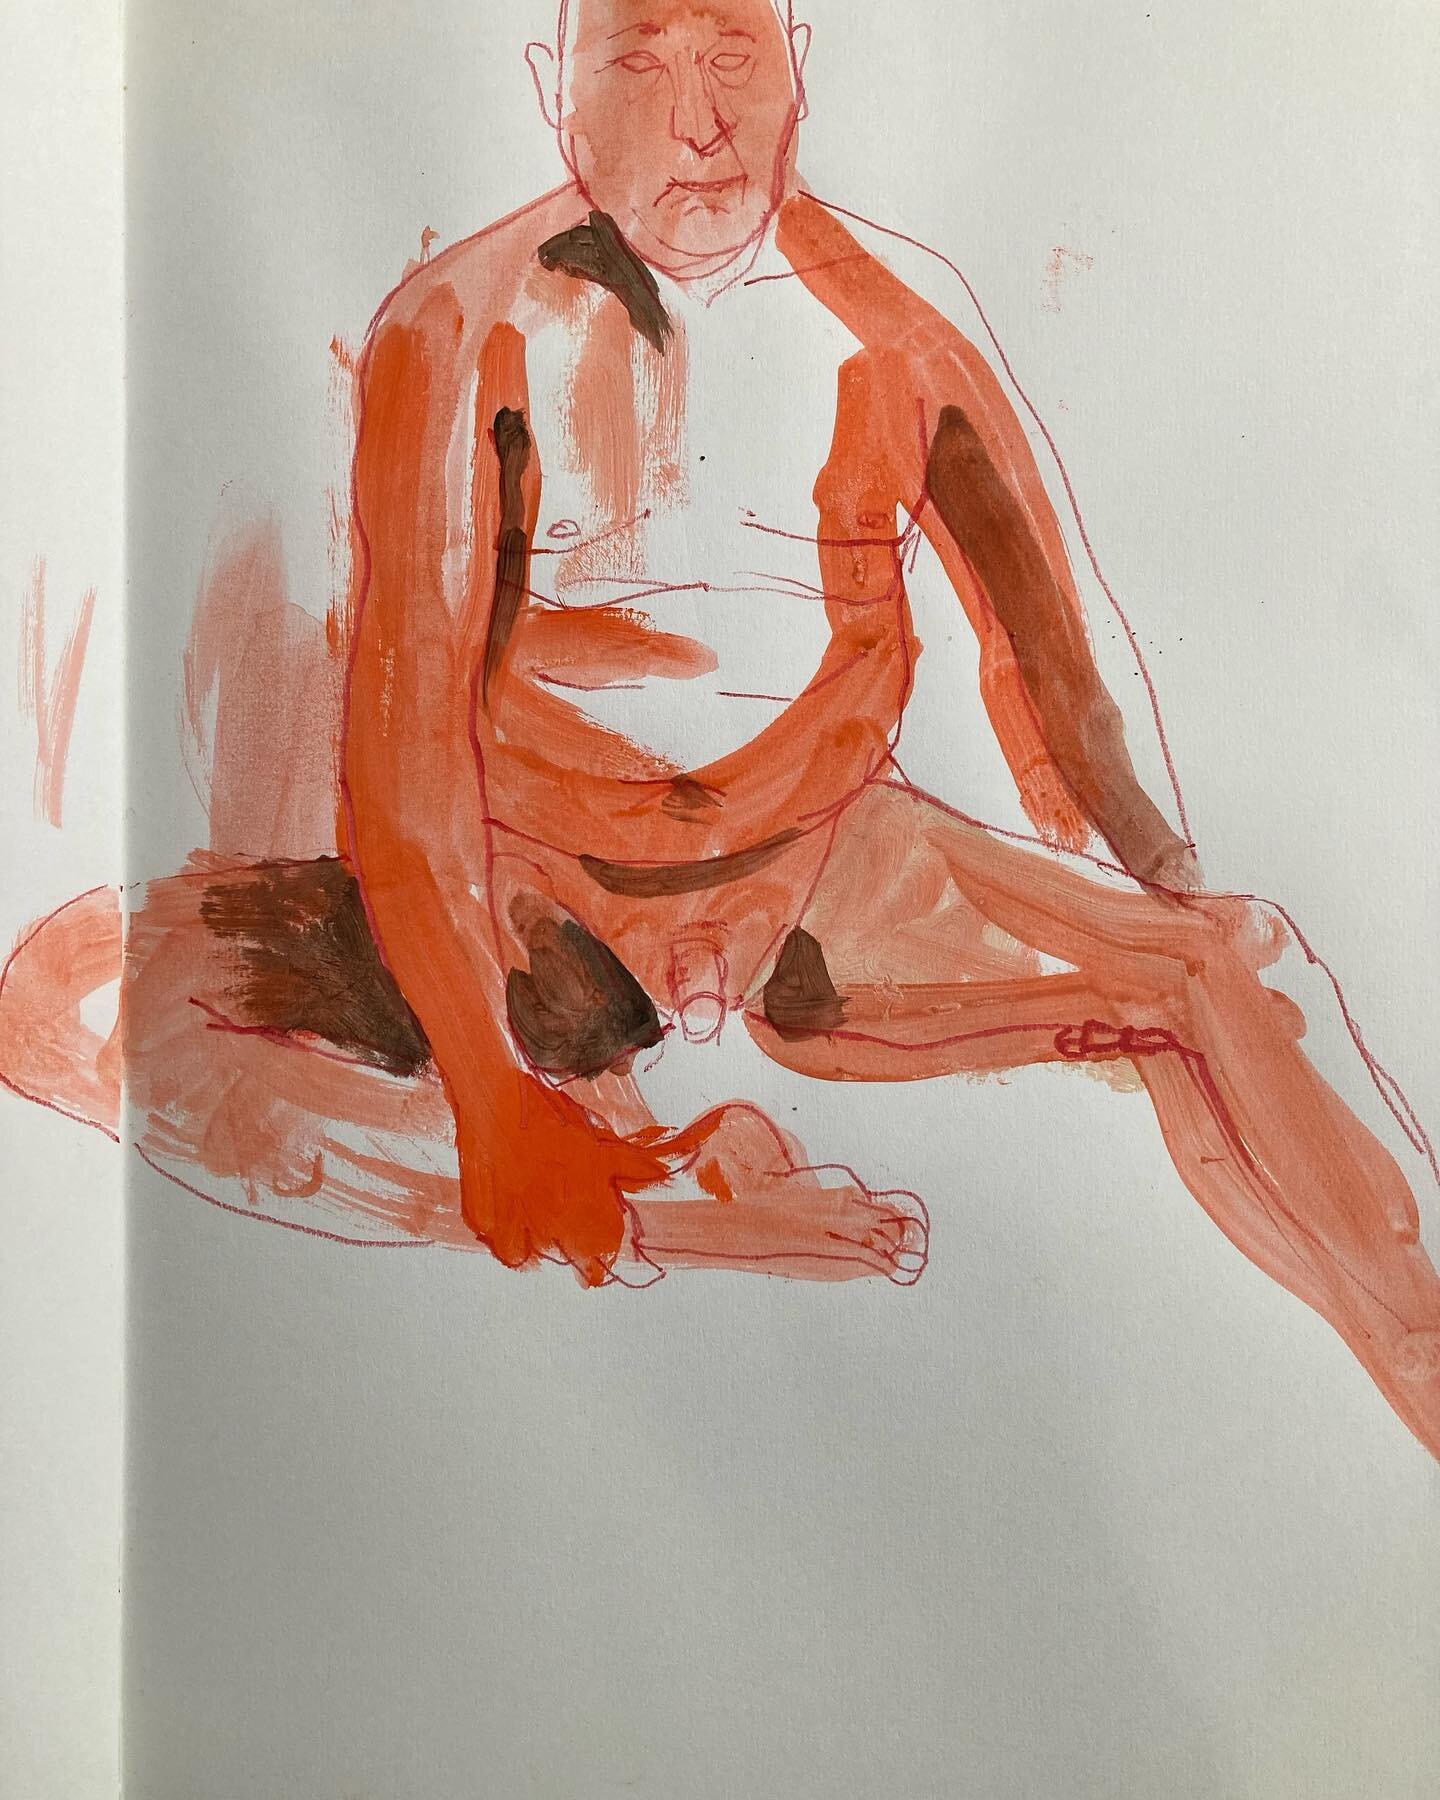 15 minutes with acrylic paints and only 3 colours 

#lifedrawing #acrylicpainting #orange